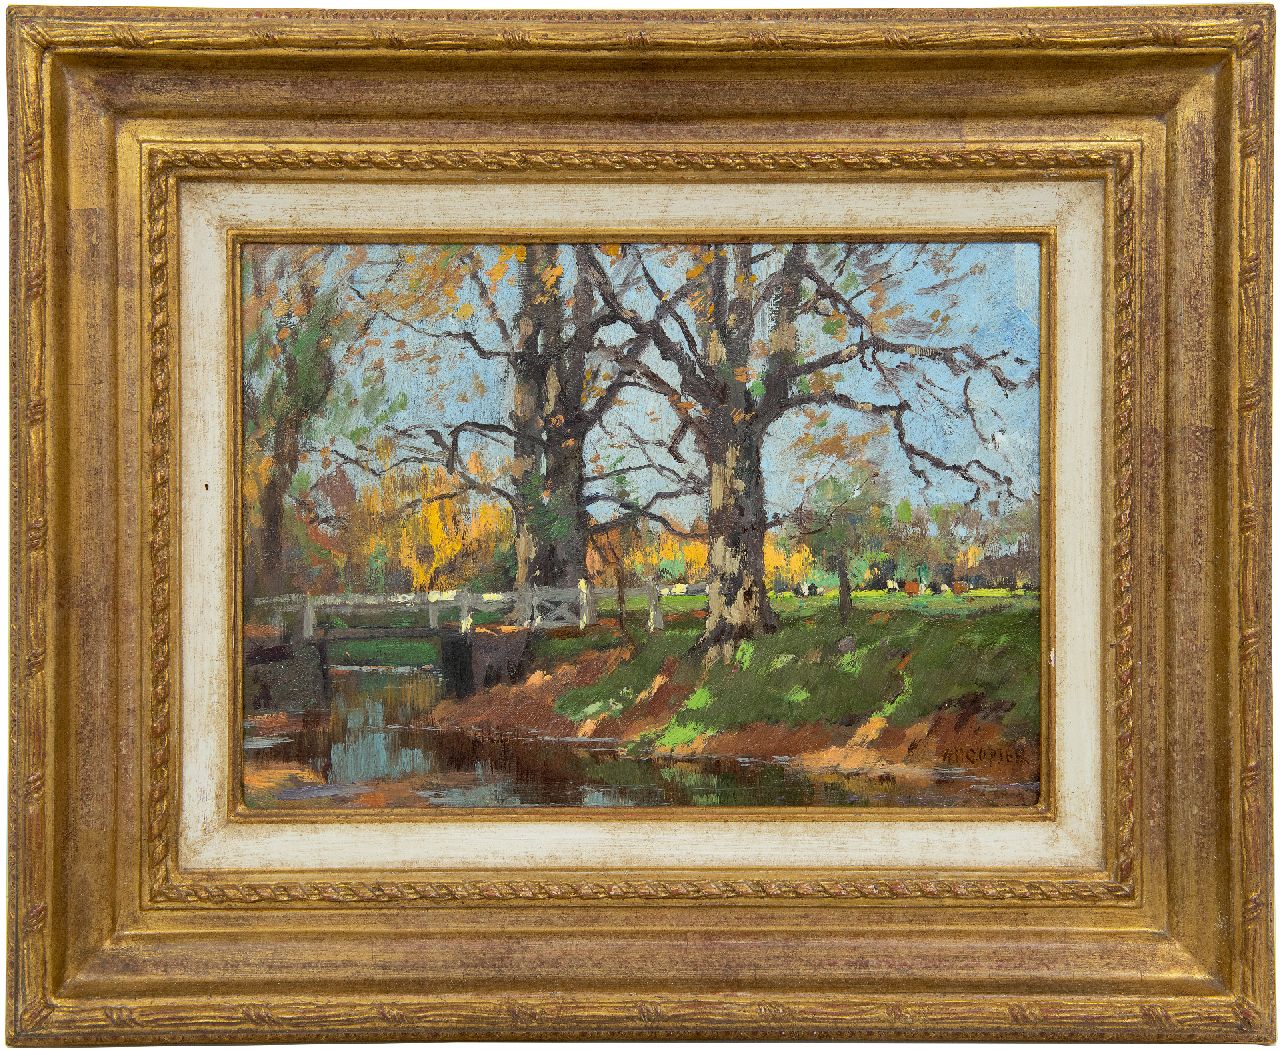 Gorter A.M.  | 'Arnold' Marc Gorter | Paintings offered for sale | Sunlit trees near a ditch (at Het Loo), oil on panel 26.0 x 36.6 cm, signed l.r. and painted ca. 1920